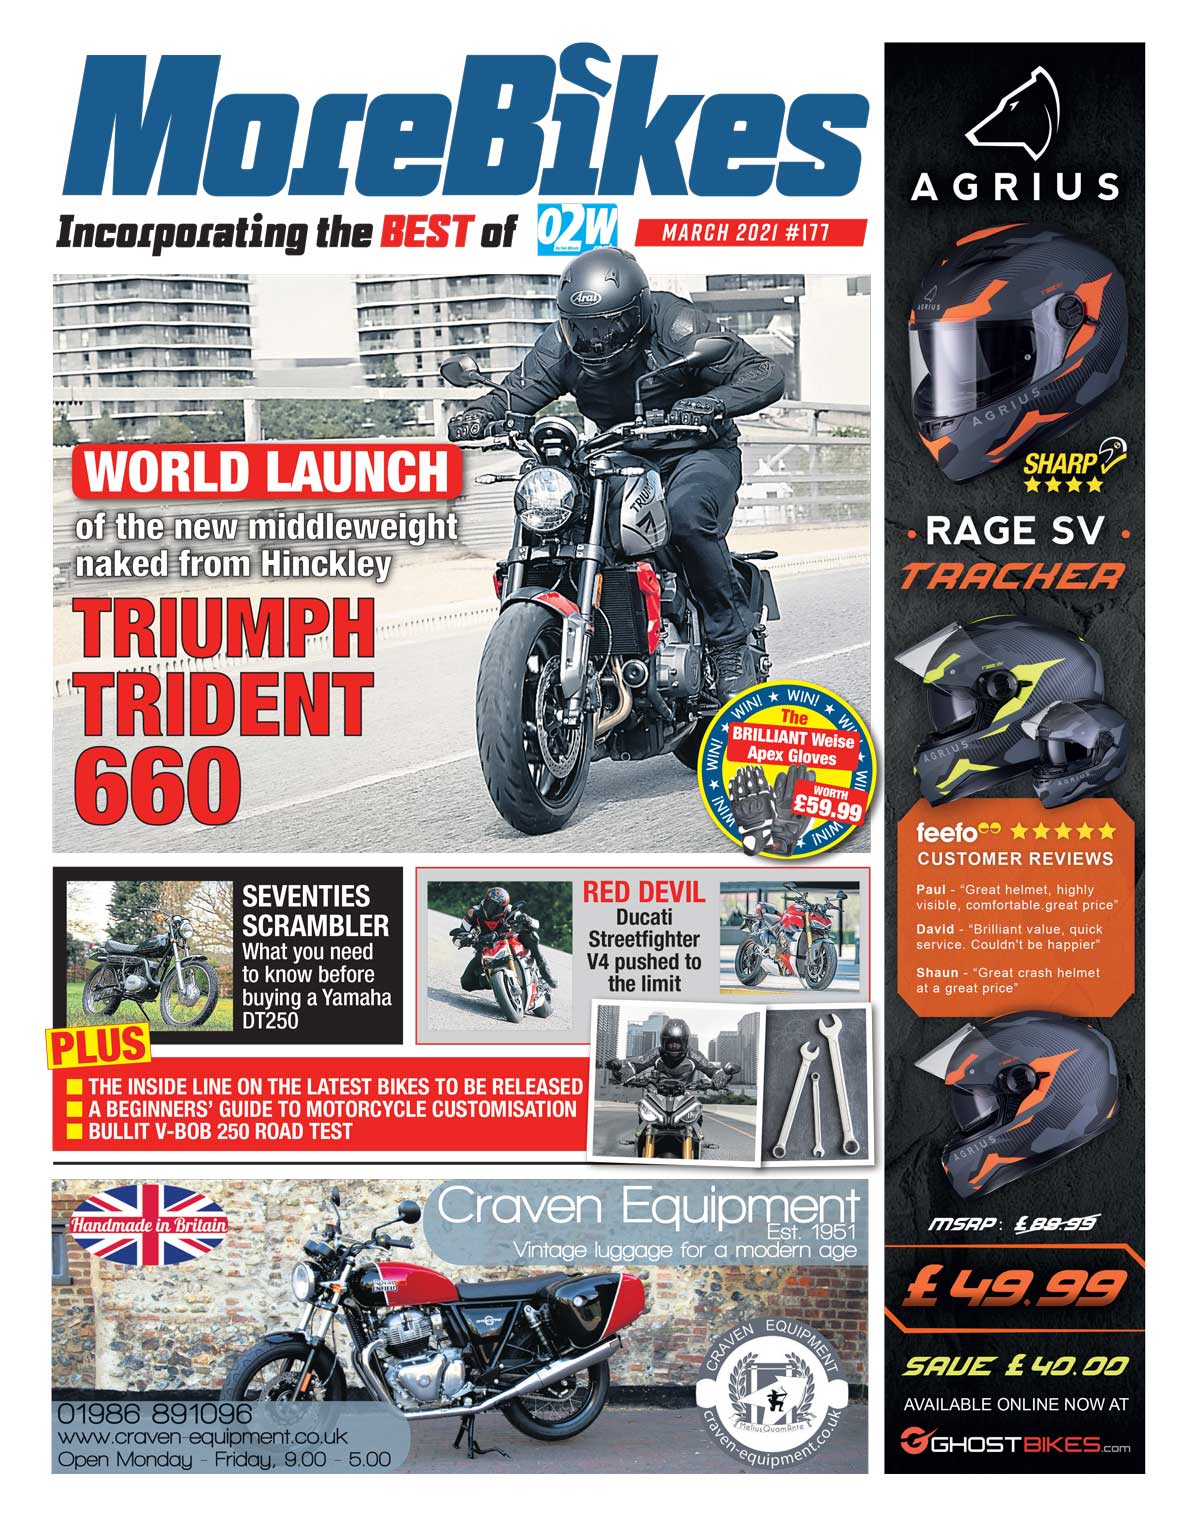 PREVIEW: March issue of MoreBikes newspaper